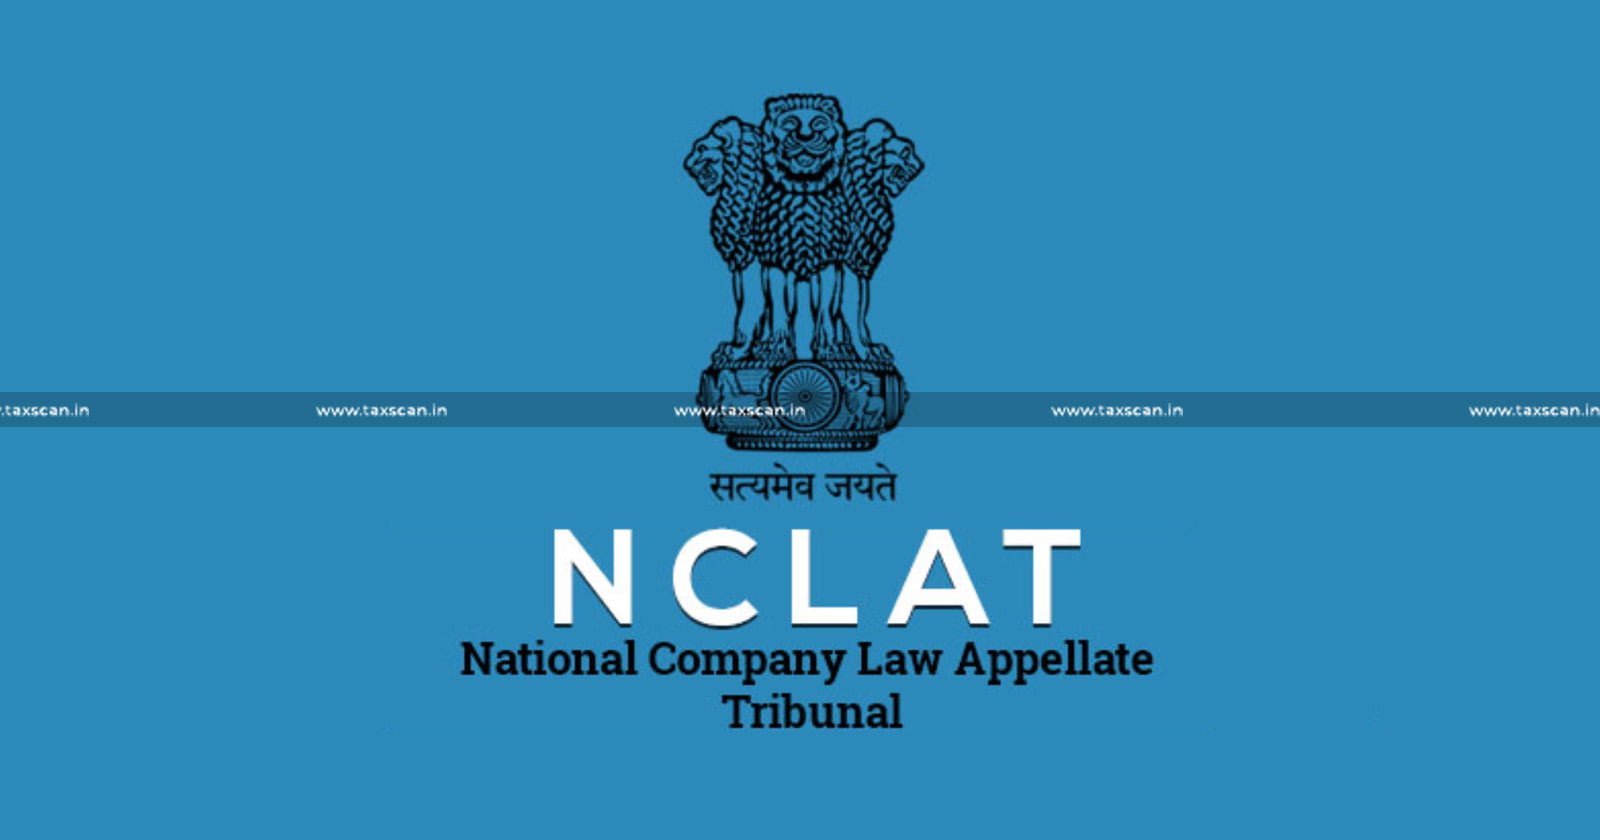 Suspension of CIRP - CIRP - IBC - NCLAT allows Appeal - NCLAT - Appeal - Suspension - Taxscan